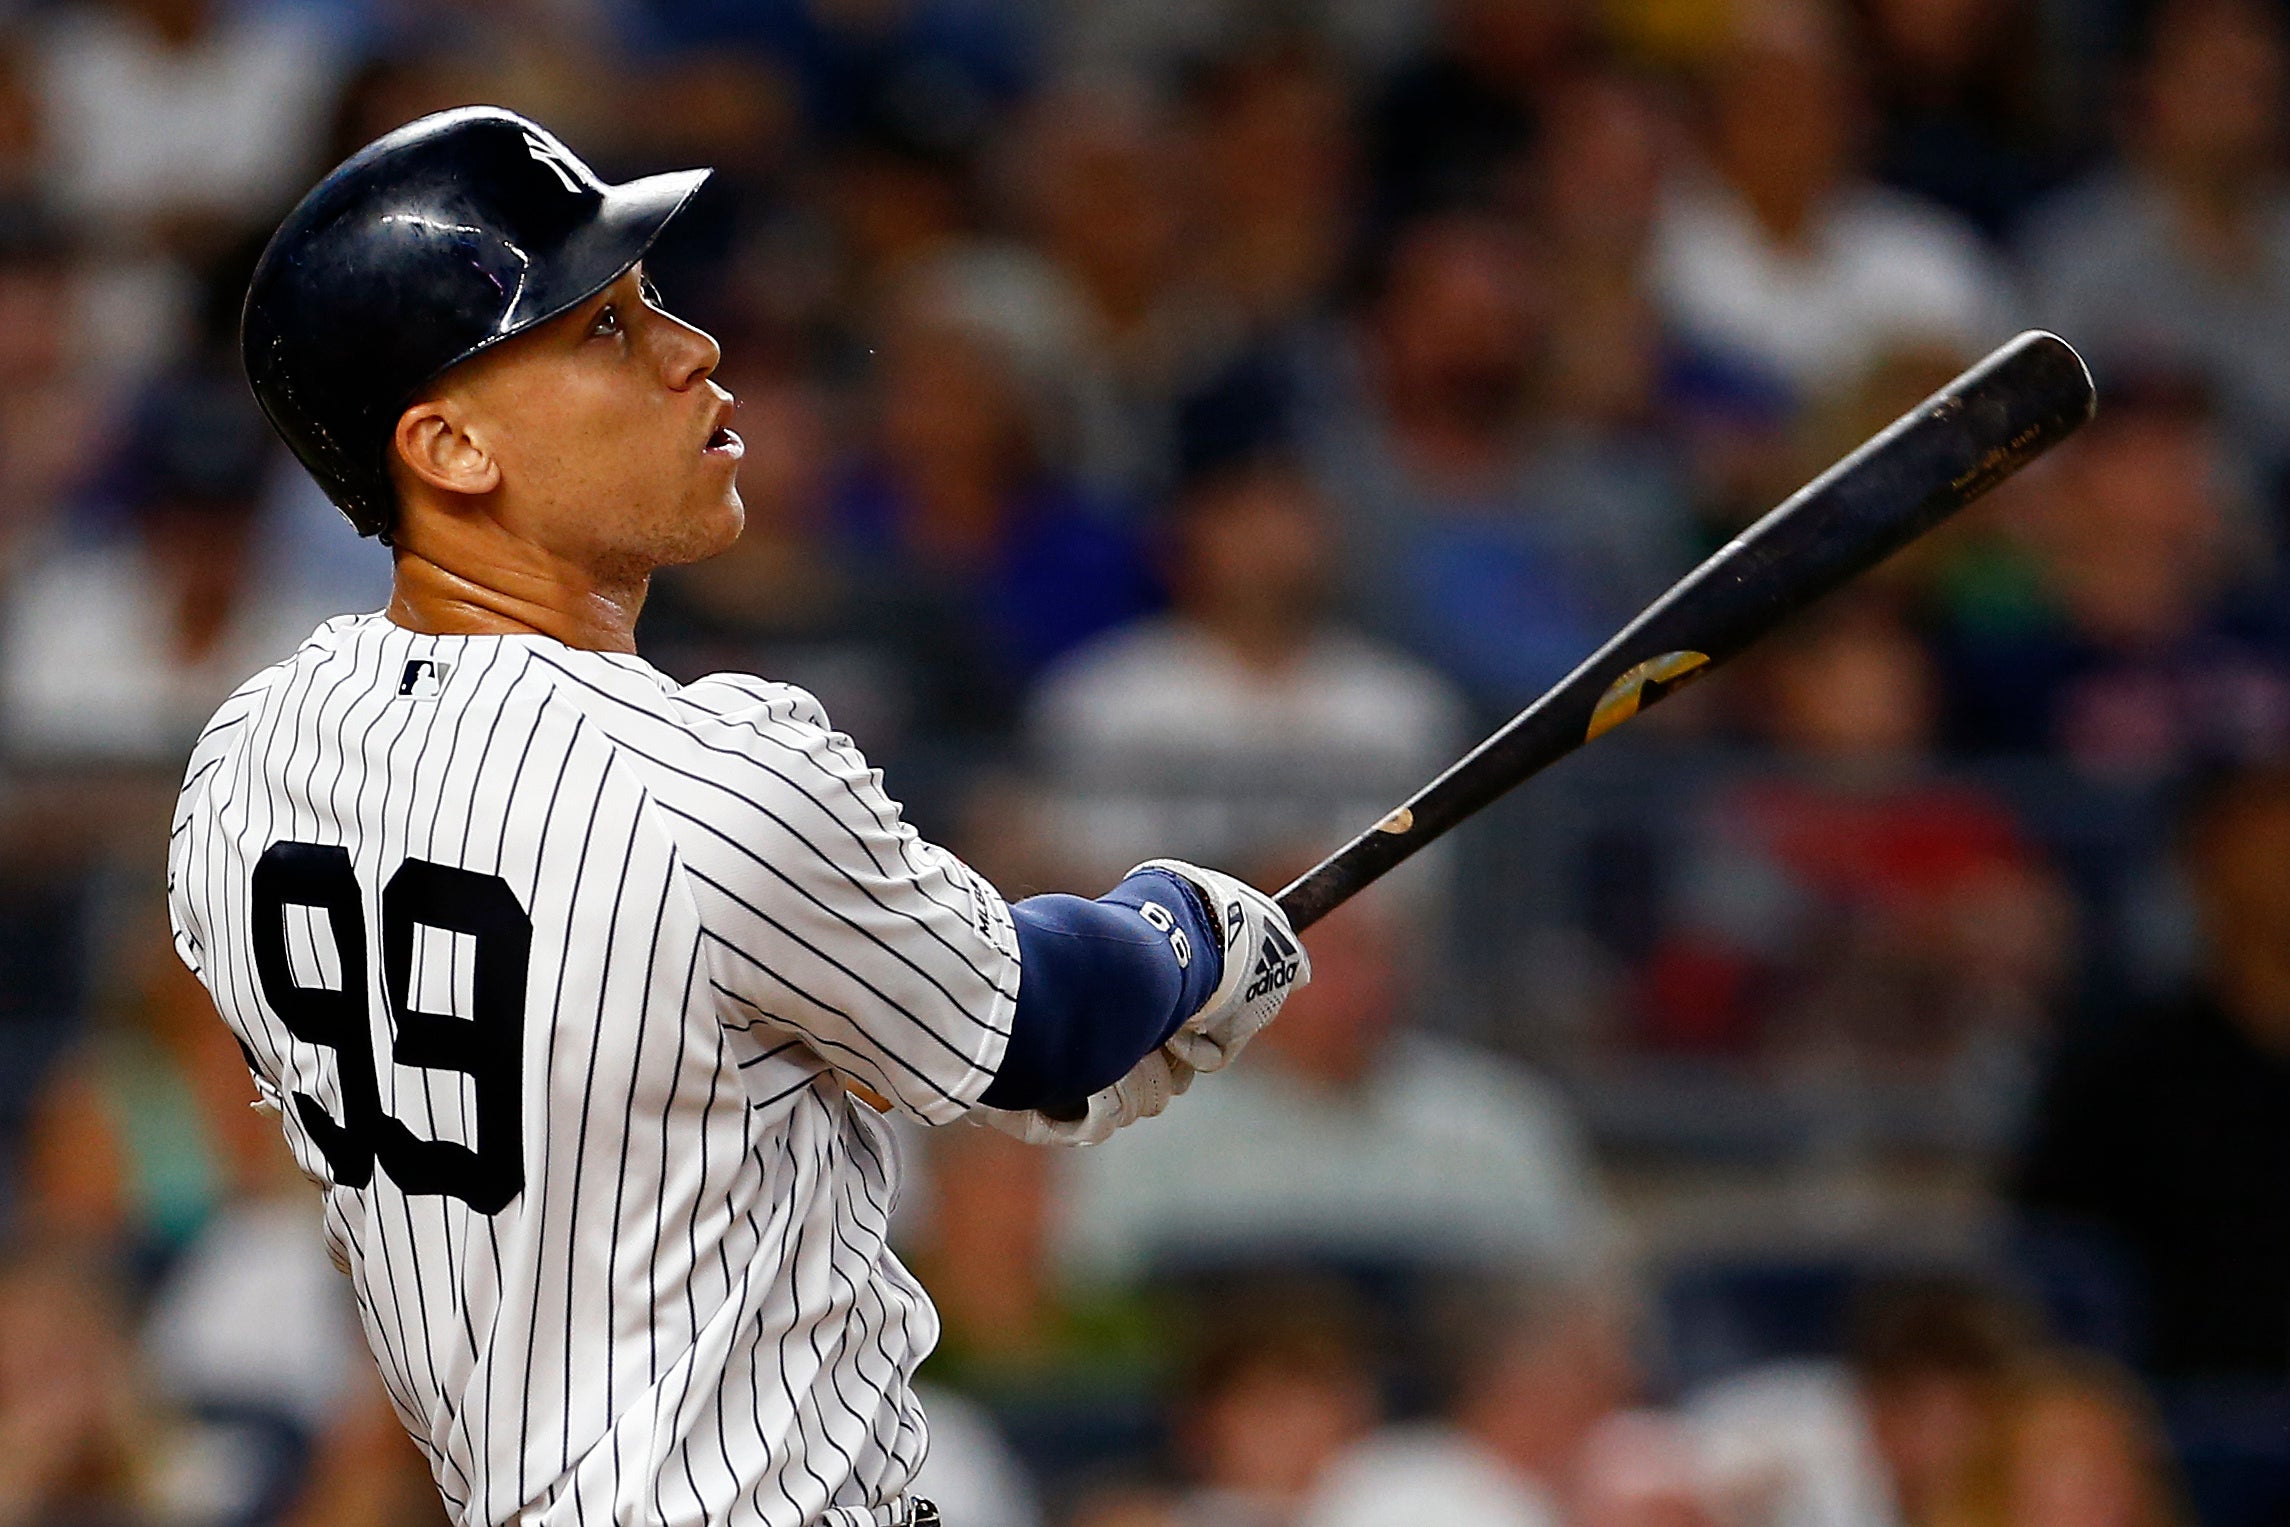 The Yankees Win Their Fifth In A Row As Didi Gregorius Homers AGAIN